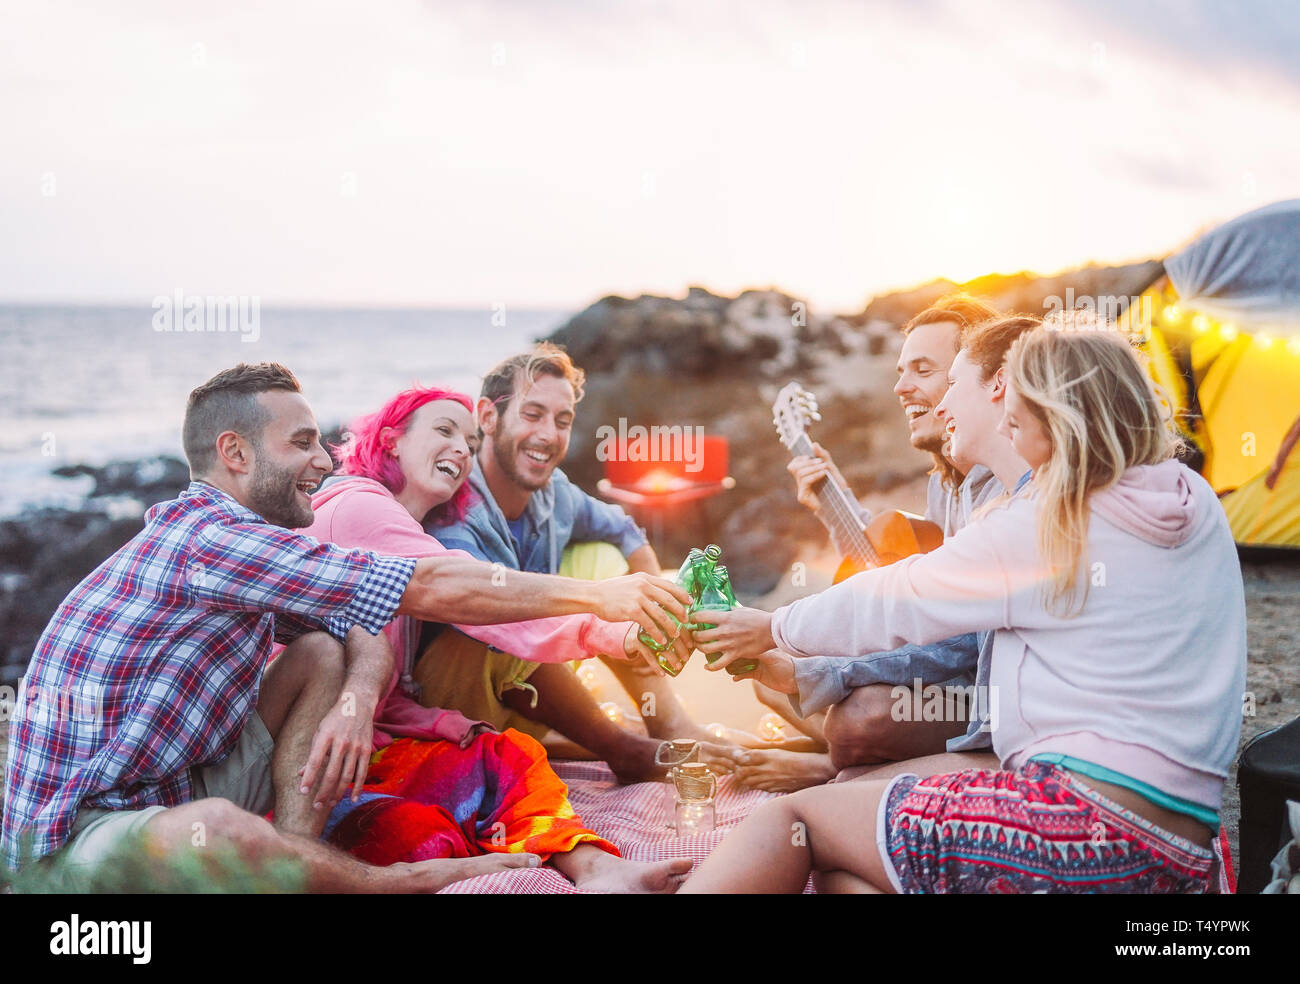 Group of friends cheering with beers outdoor - Happy people camping with tent and making a barbecue having fun toasting bottles of beer Stock Photo